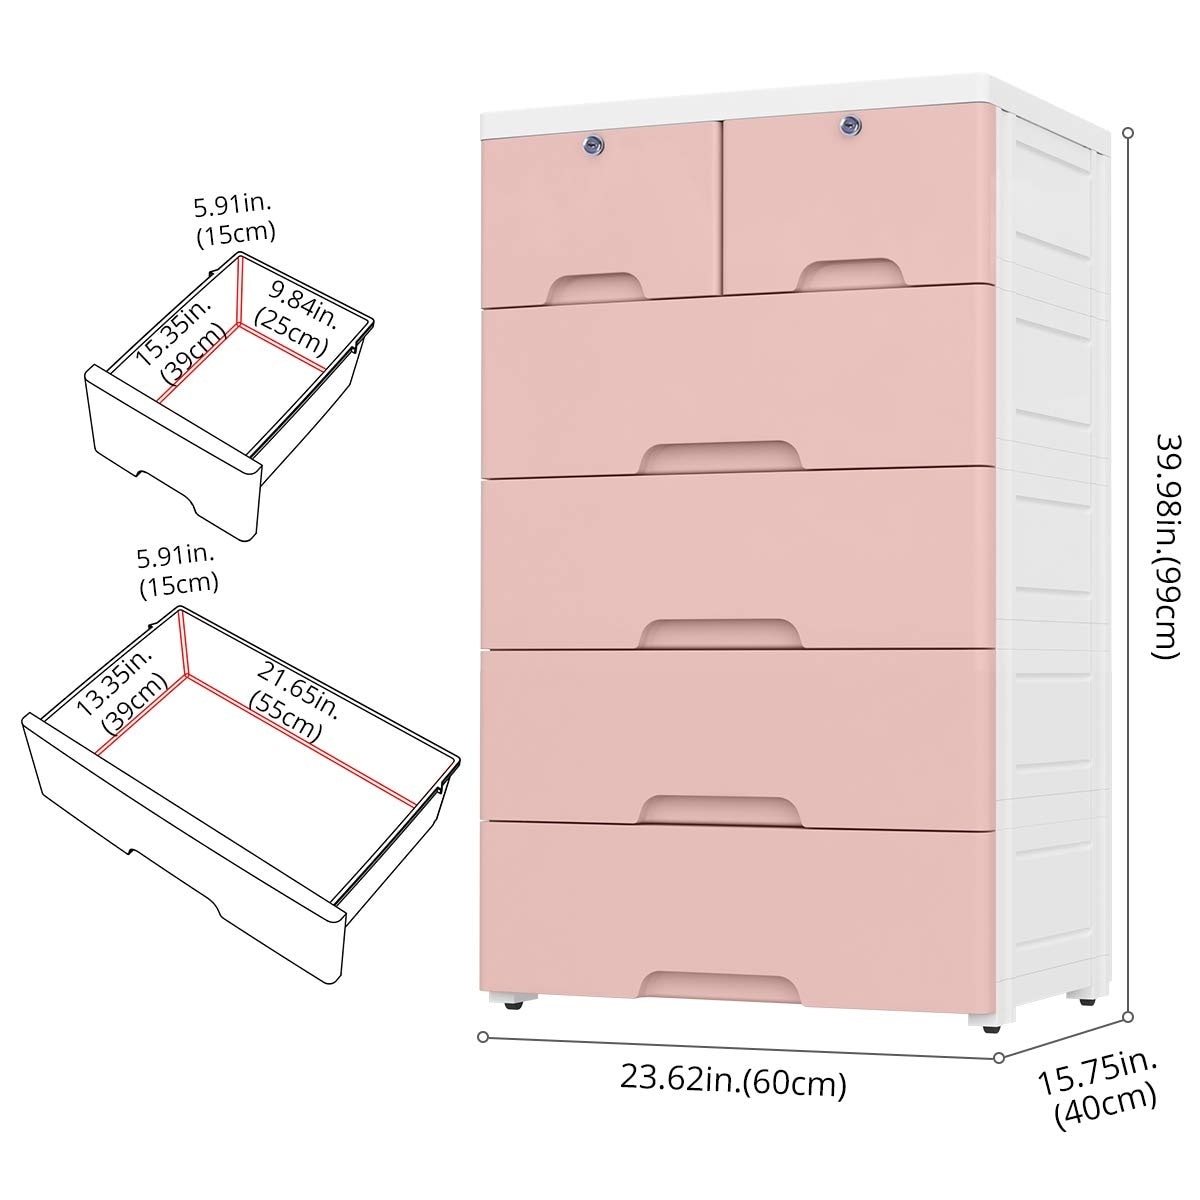 https://ak1.ostkcdn.com/images/products/is/images/direct/e26d705e51d07b3cc70efa364047d9640c121a99/Plastic-Drawers-Dresser%2CStorage-Cabinet-with-6-Drawers%2CCloset-Drawers-Tall-Dresser-Organizer-for-Clothes%2CPlayroom.jpg